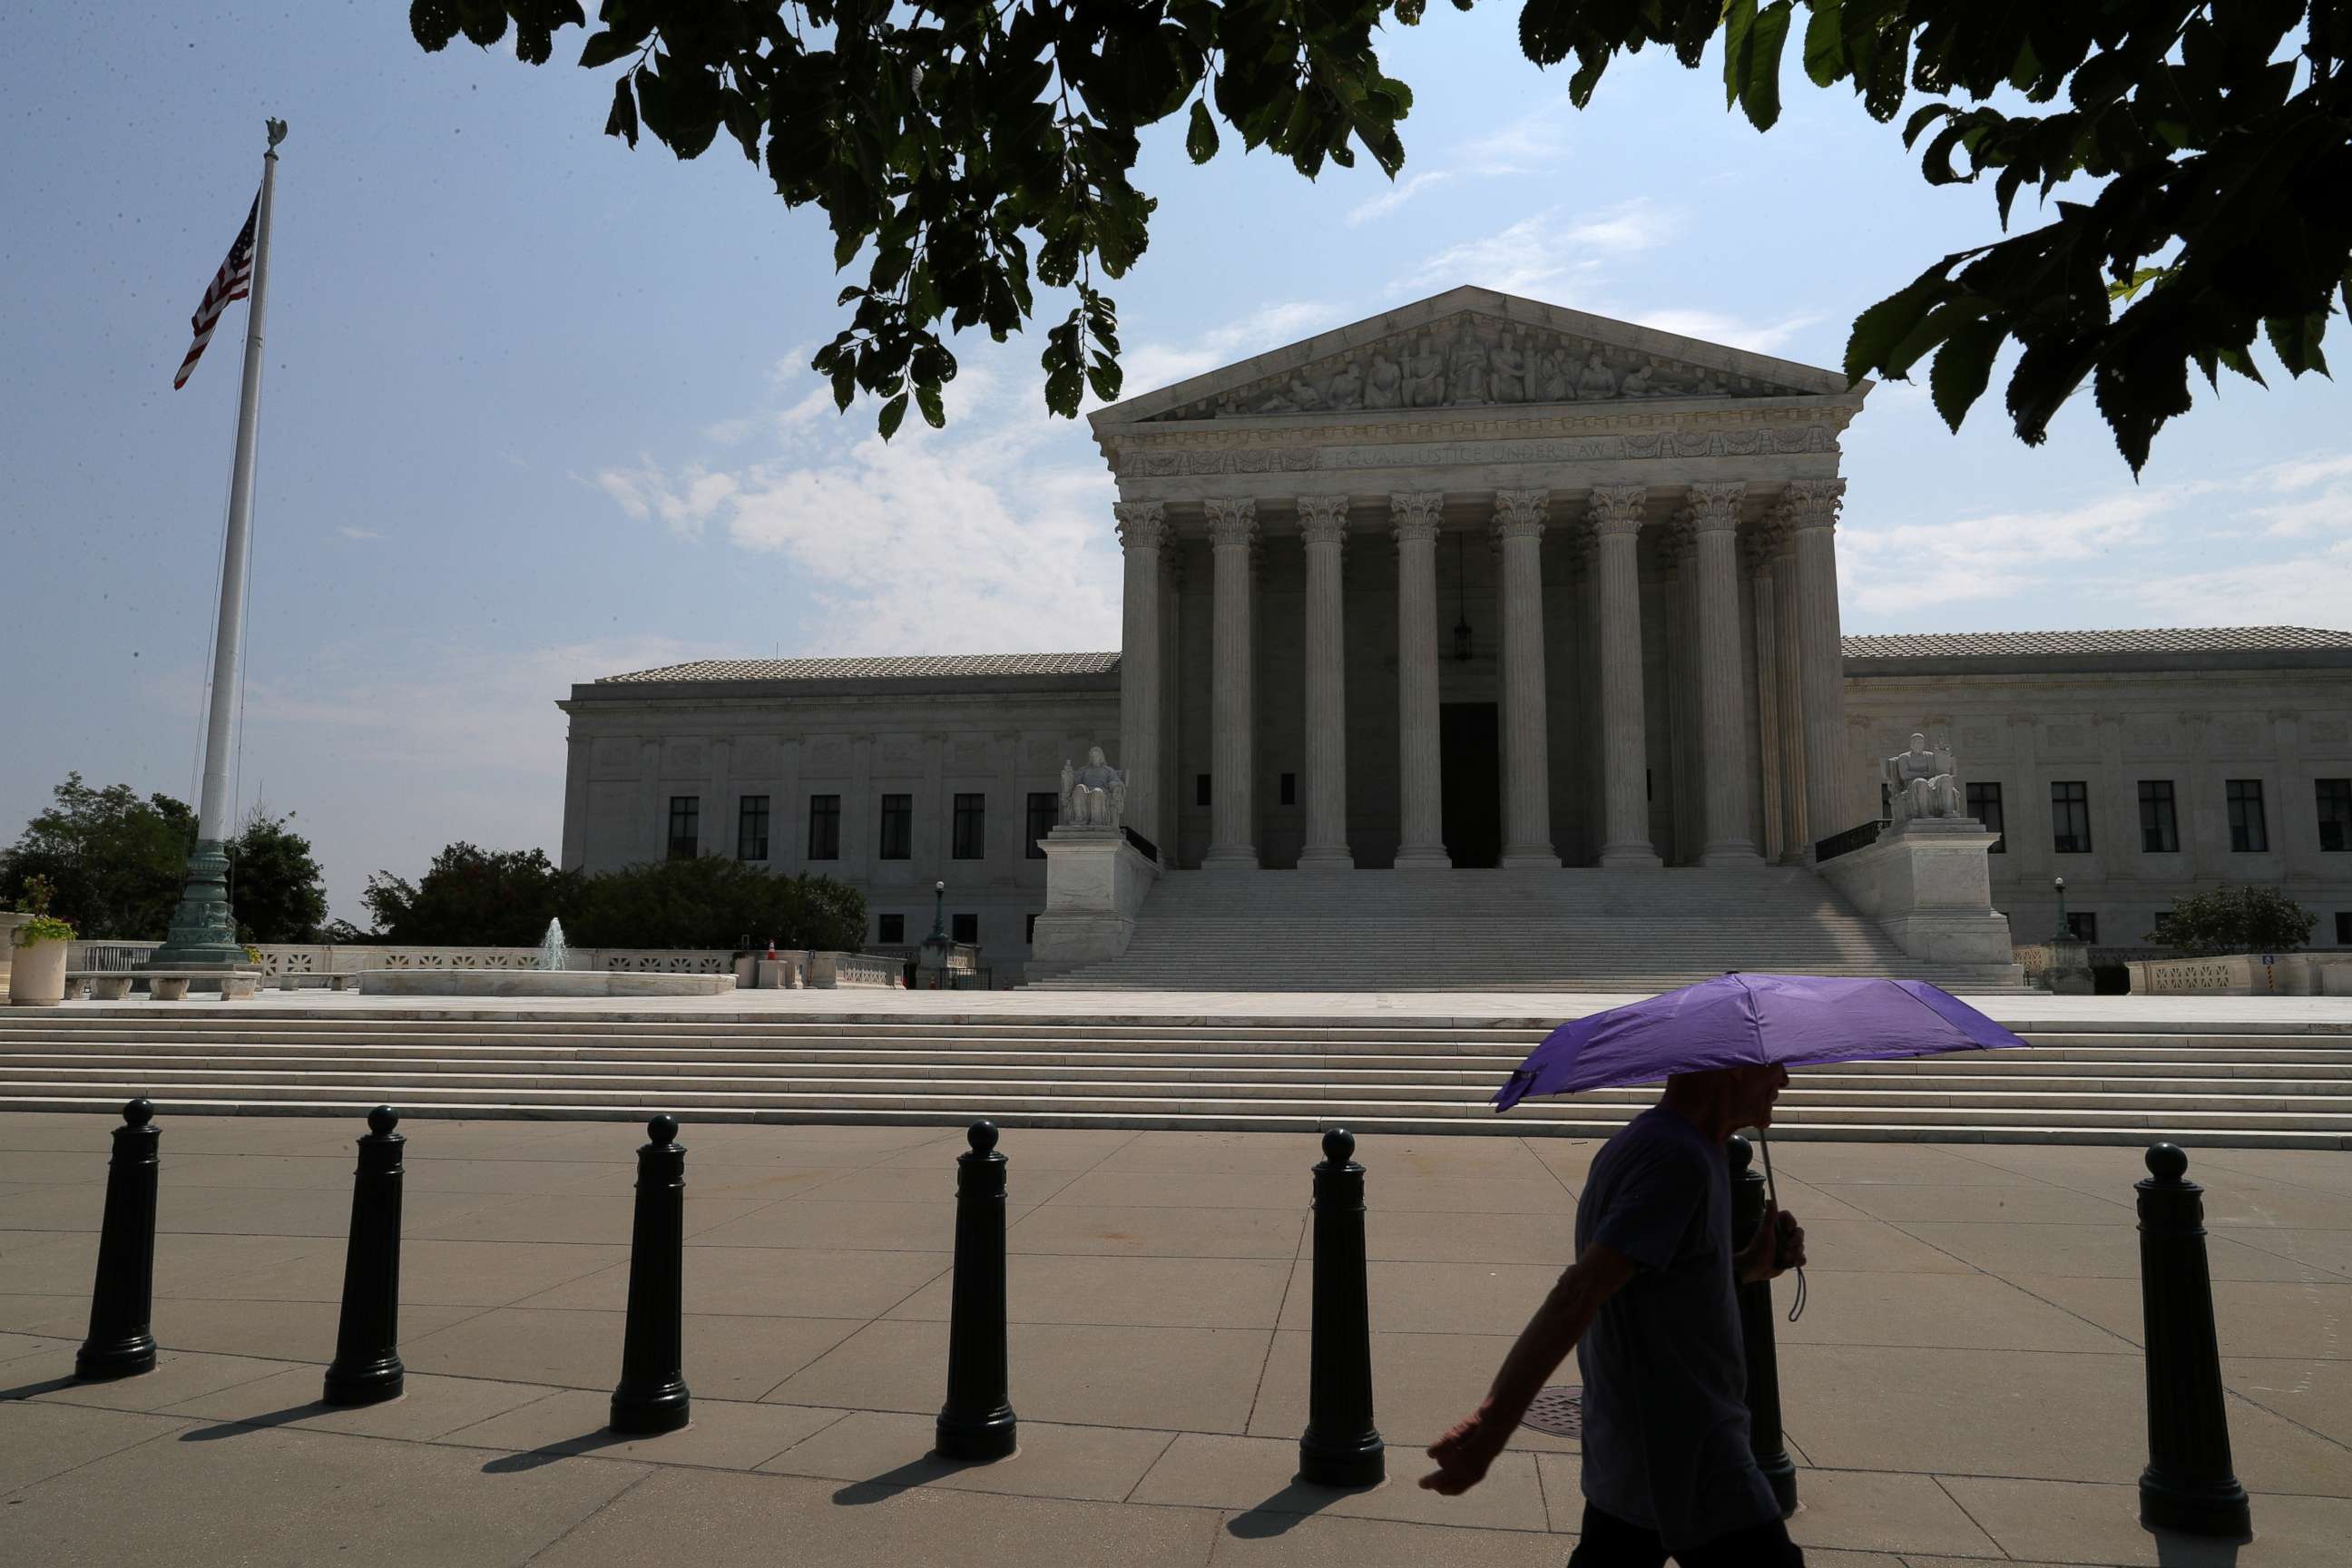 PHOTO: A pedestrian holding an umbrella walks along First Street, as a series of rulings are issued at the United States Supreme Court in Washington, July 6, 2020.